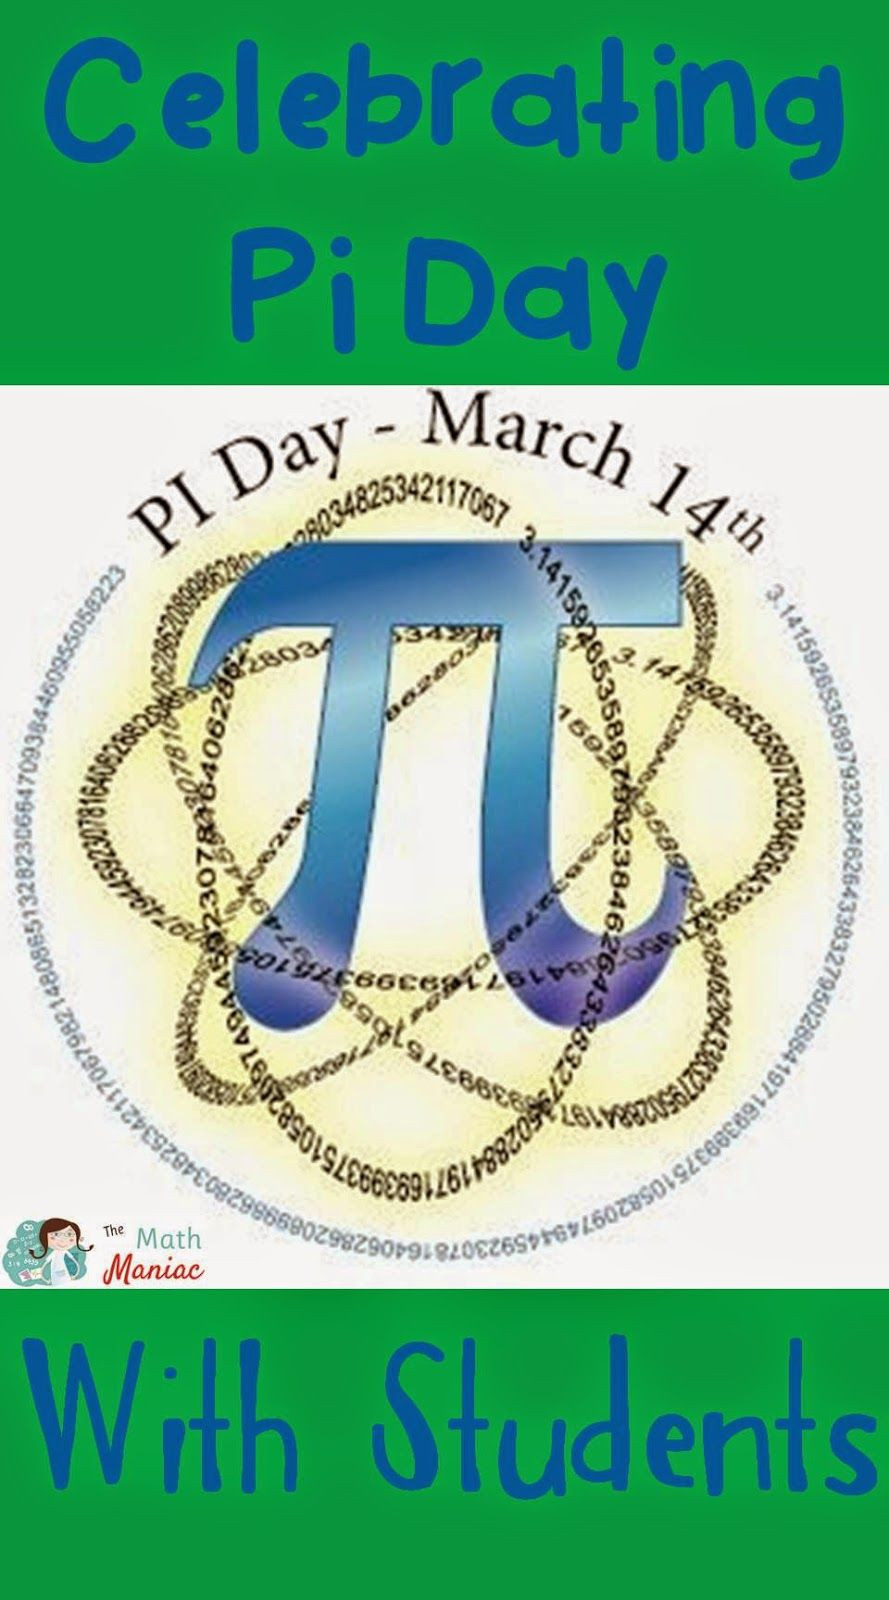 Pi Day Activities For Elementary School
 Ideas for celebrating Pi day with upper elementary and